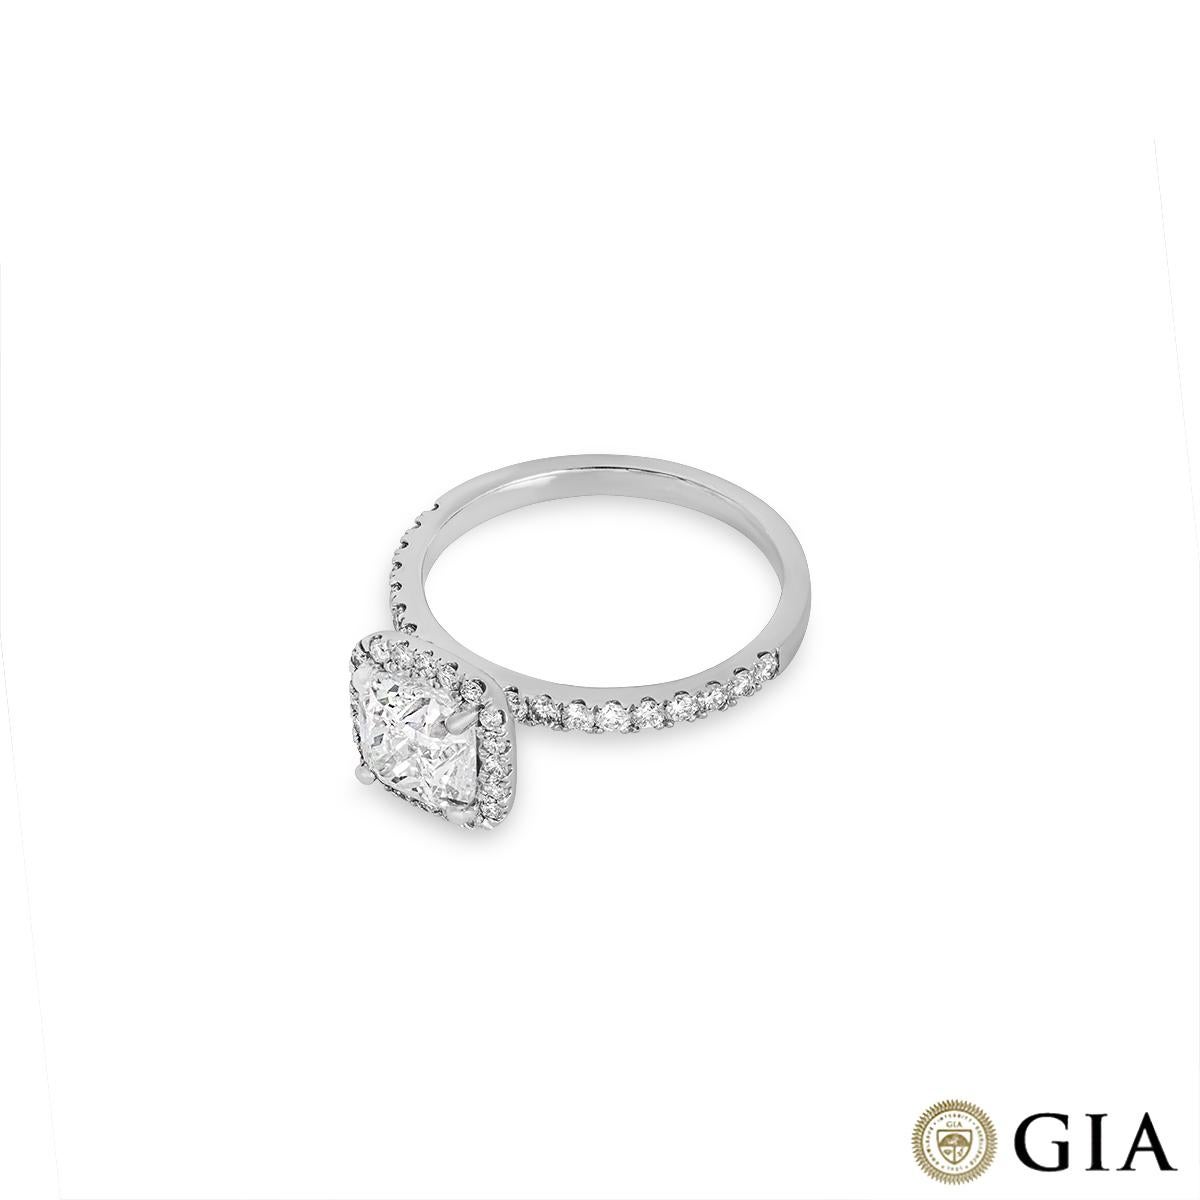 GIA Certified White Gold Cushion Cut Diamond Engagement Ring 1.51ct F/VS2 In Excellent Condition For Sale In London, GB